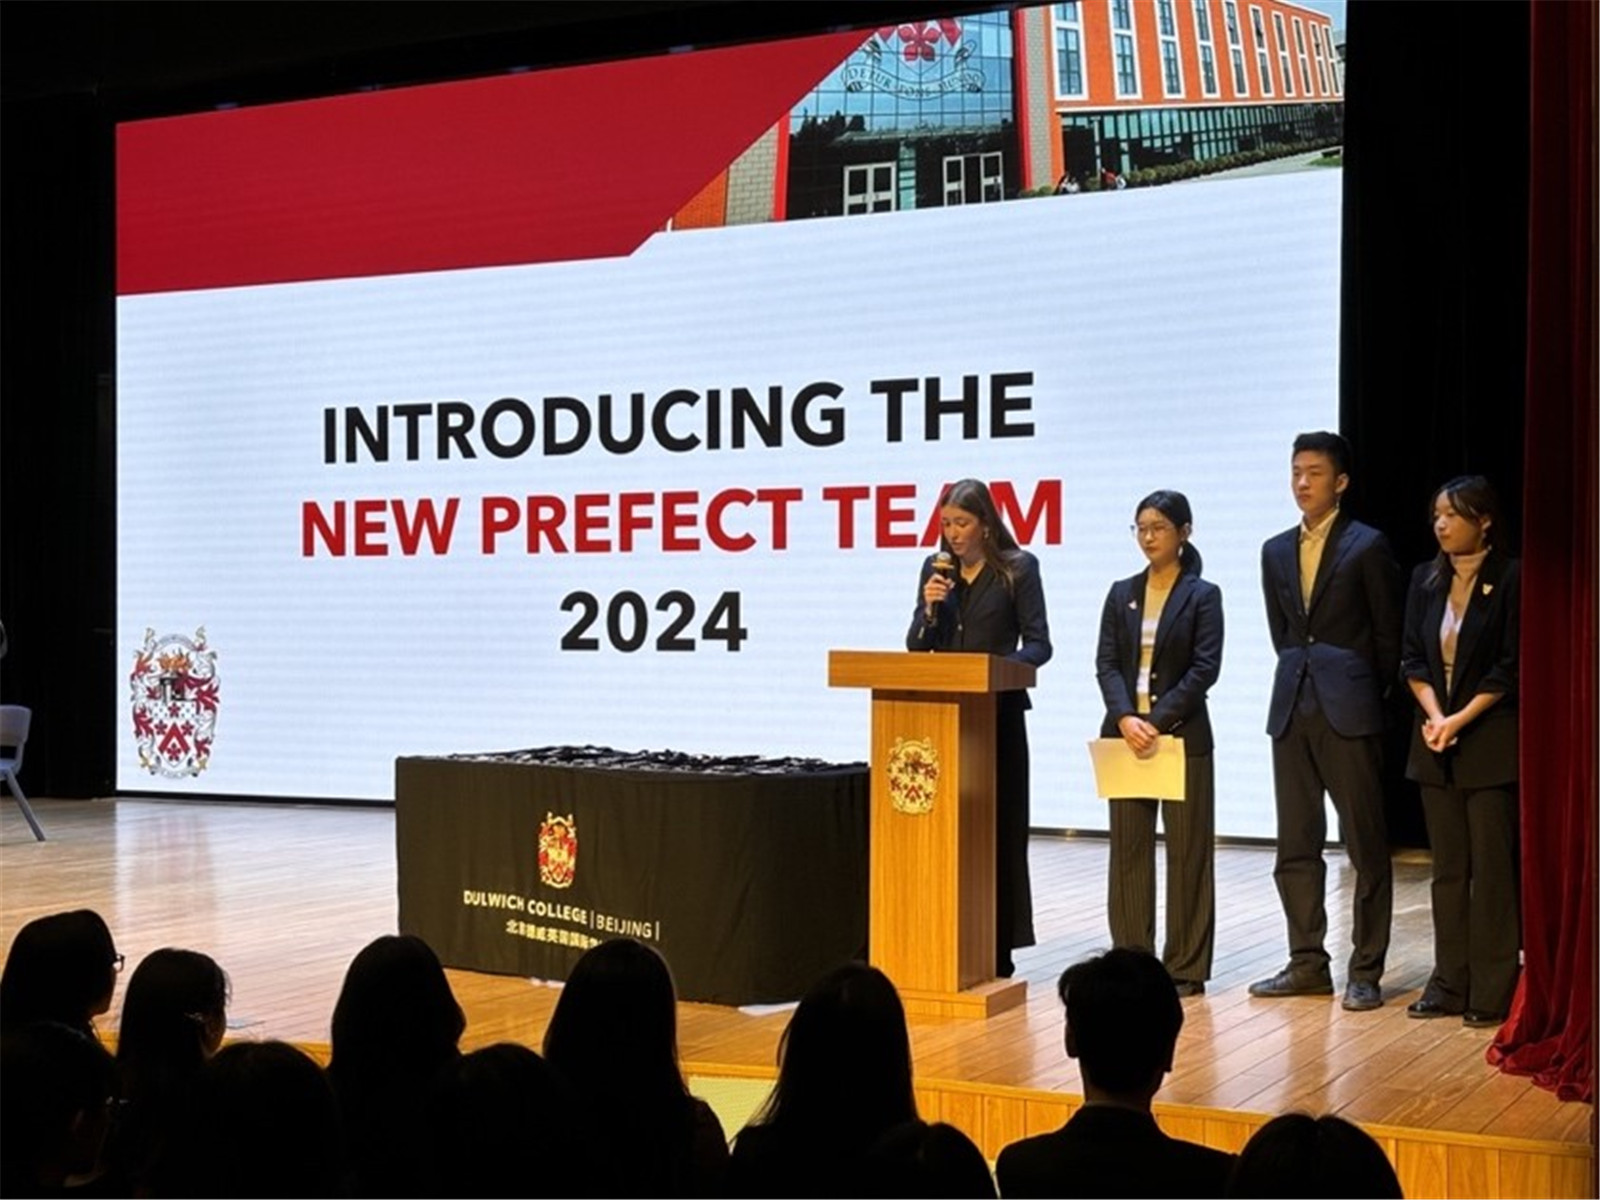 Prefect Launch Assembly in January 2024